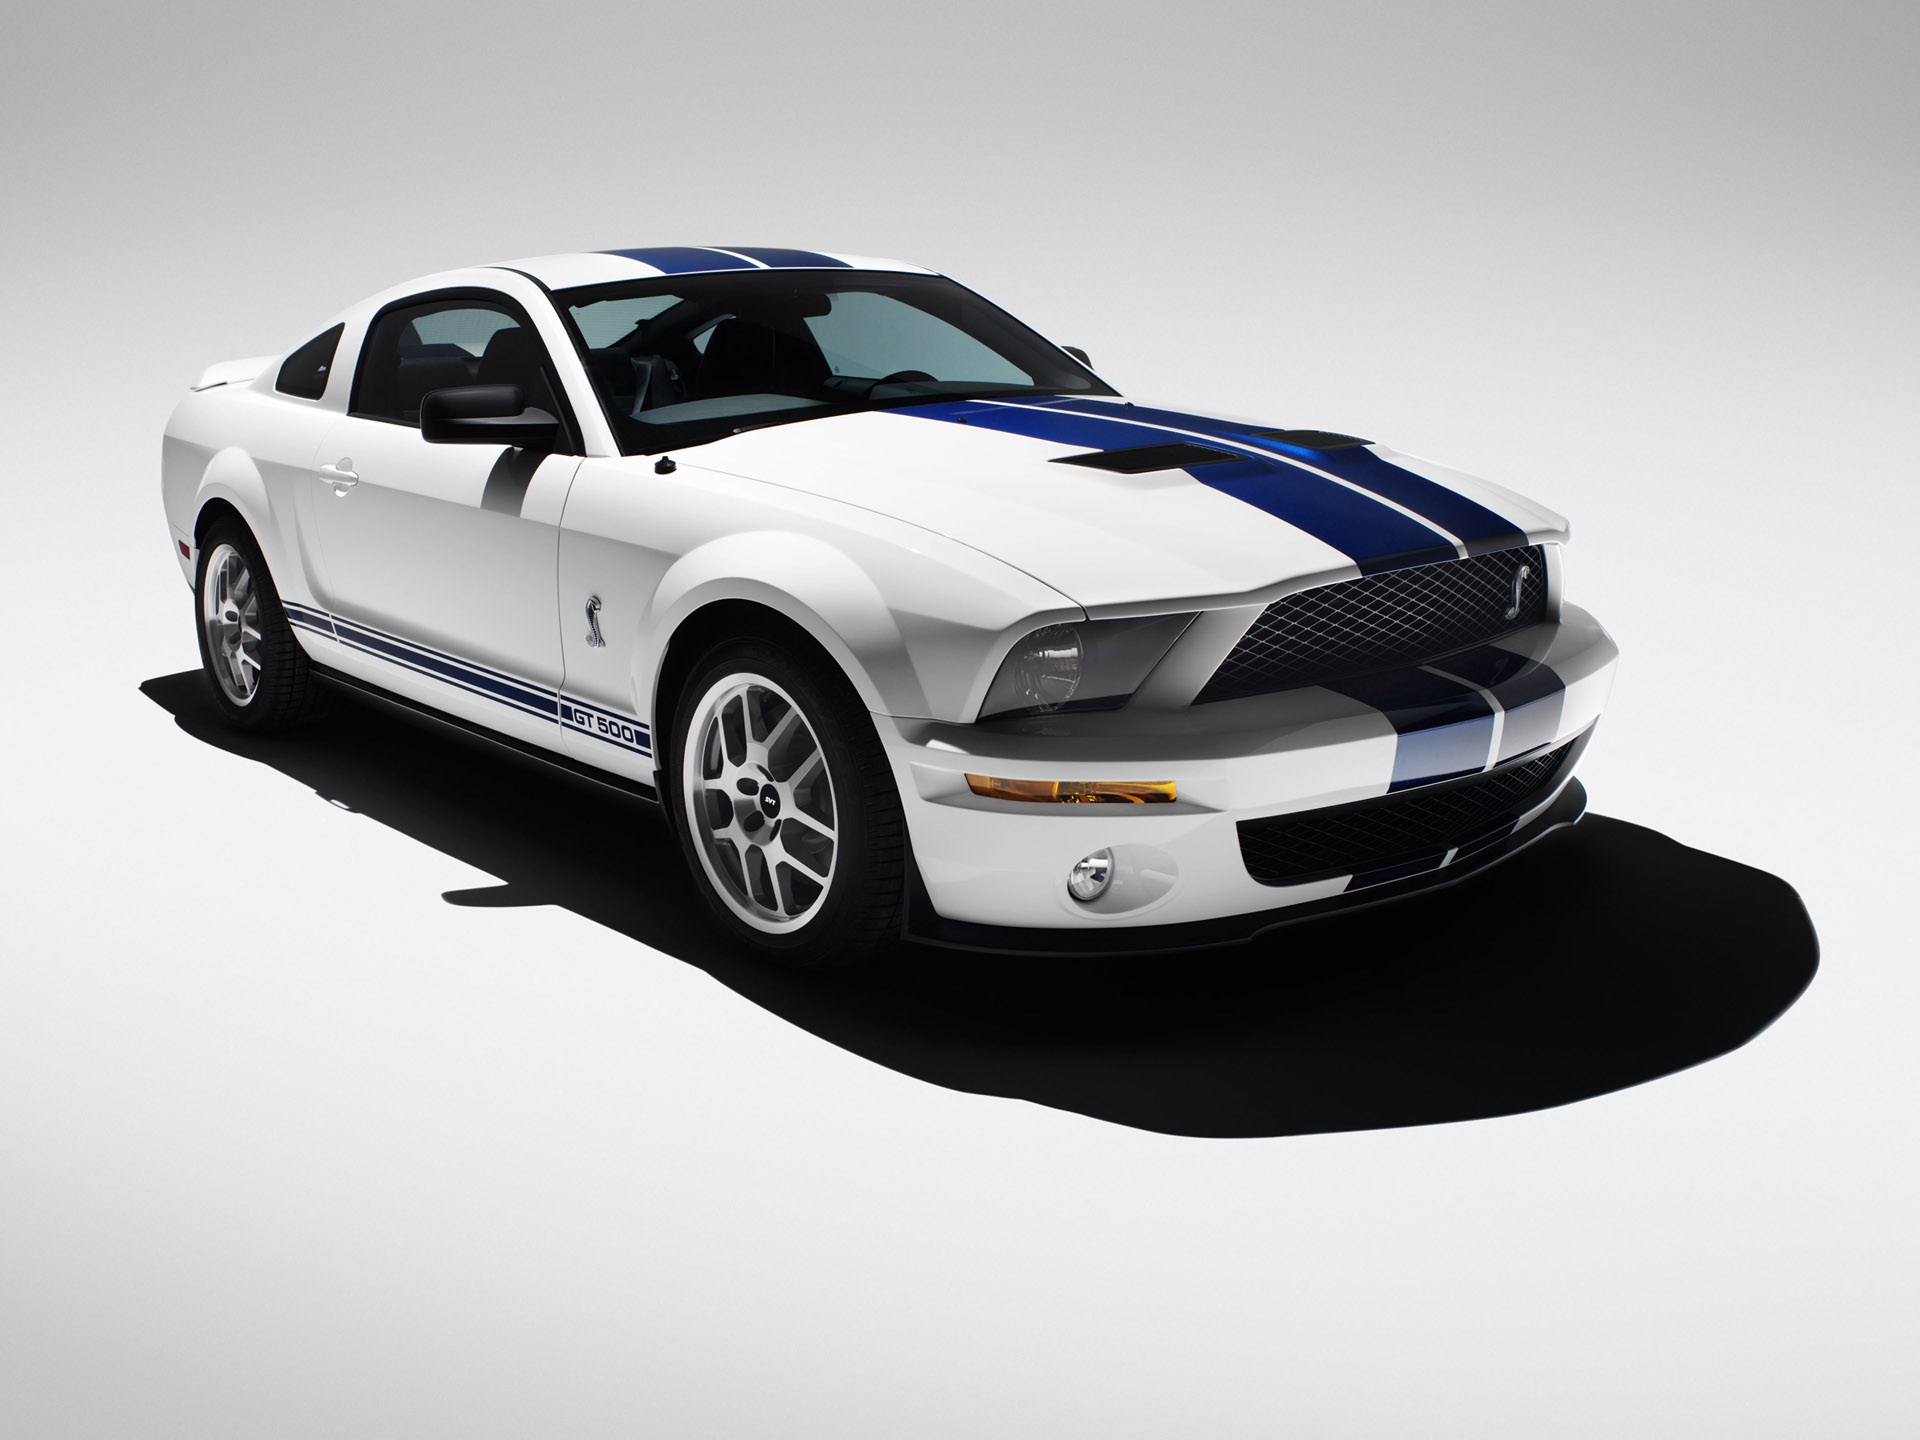 2007 Ford Mustang Shelby Gt500 Cobra Coupe 2d - HD Wallpaper 